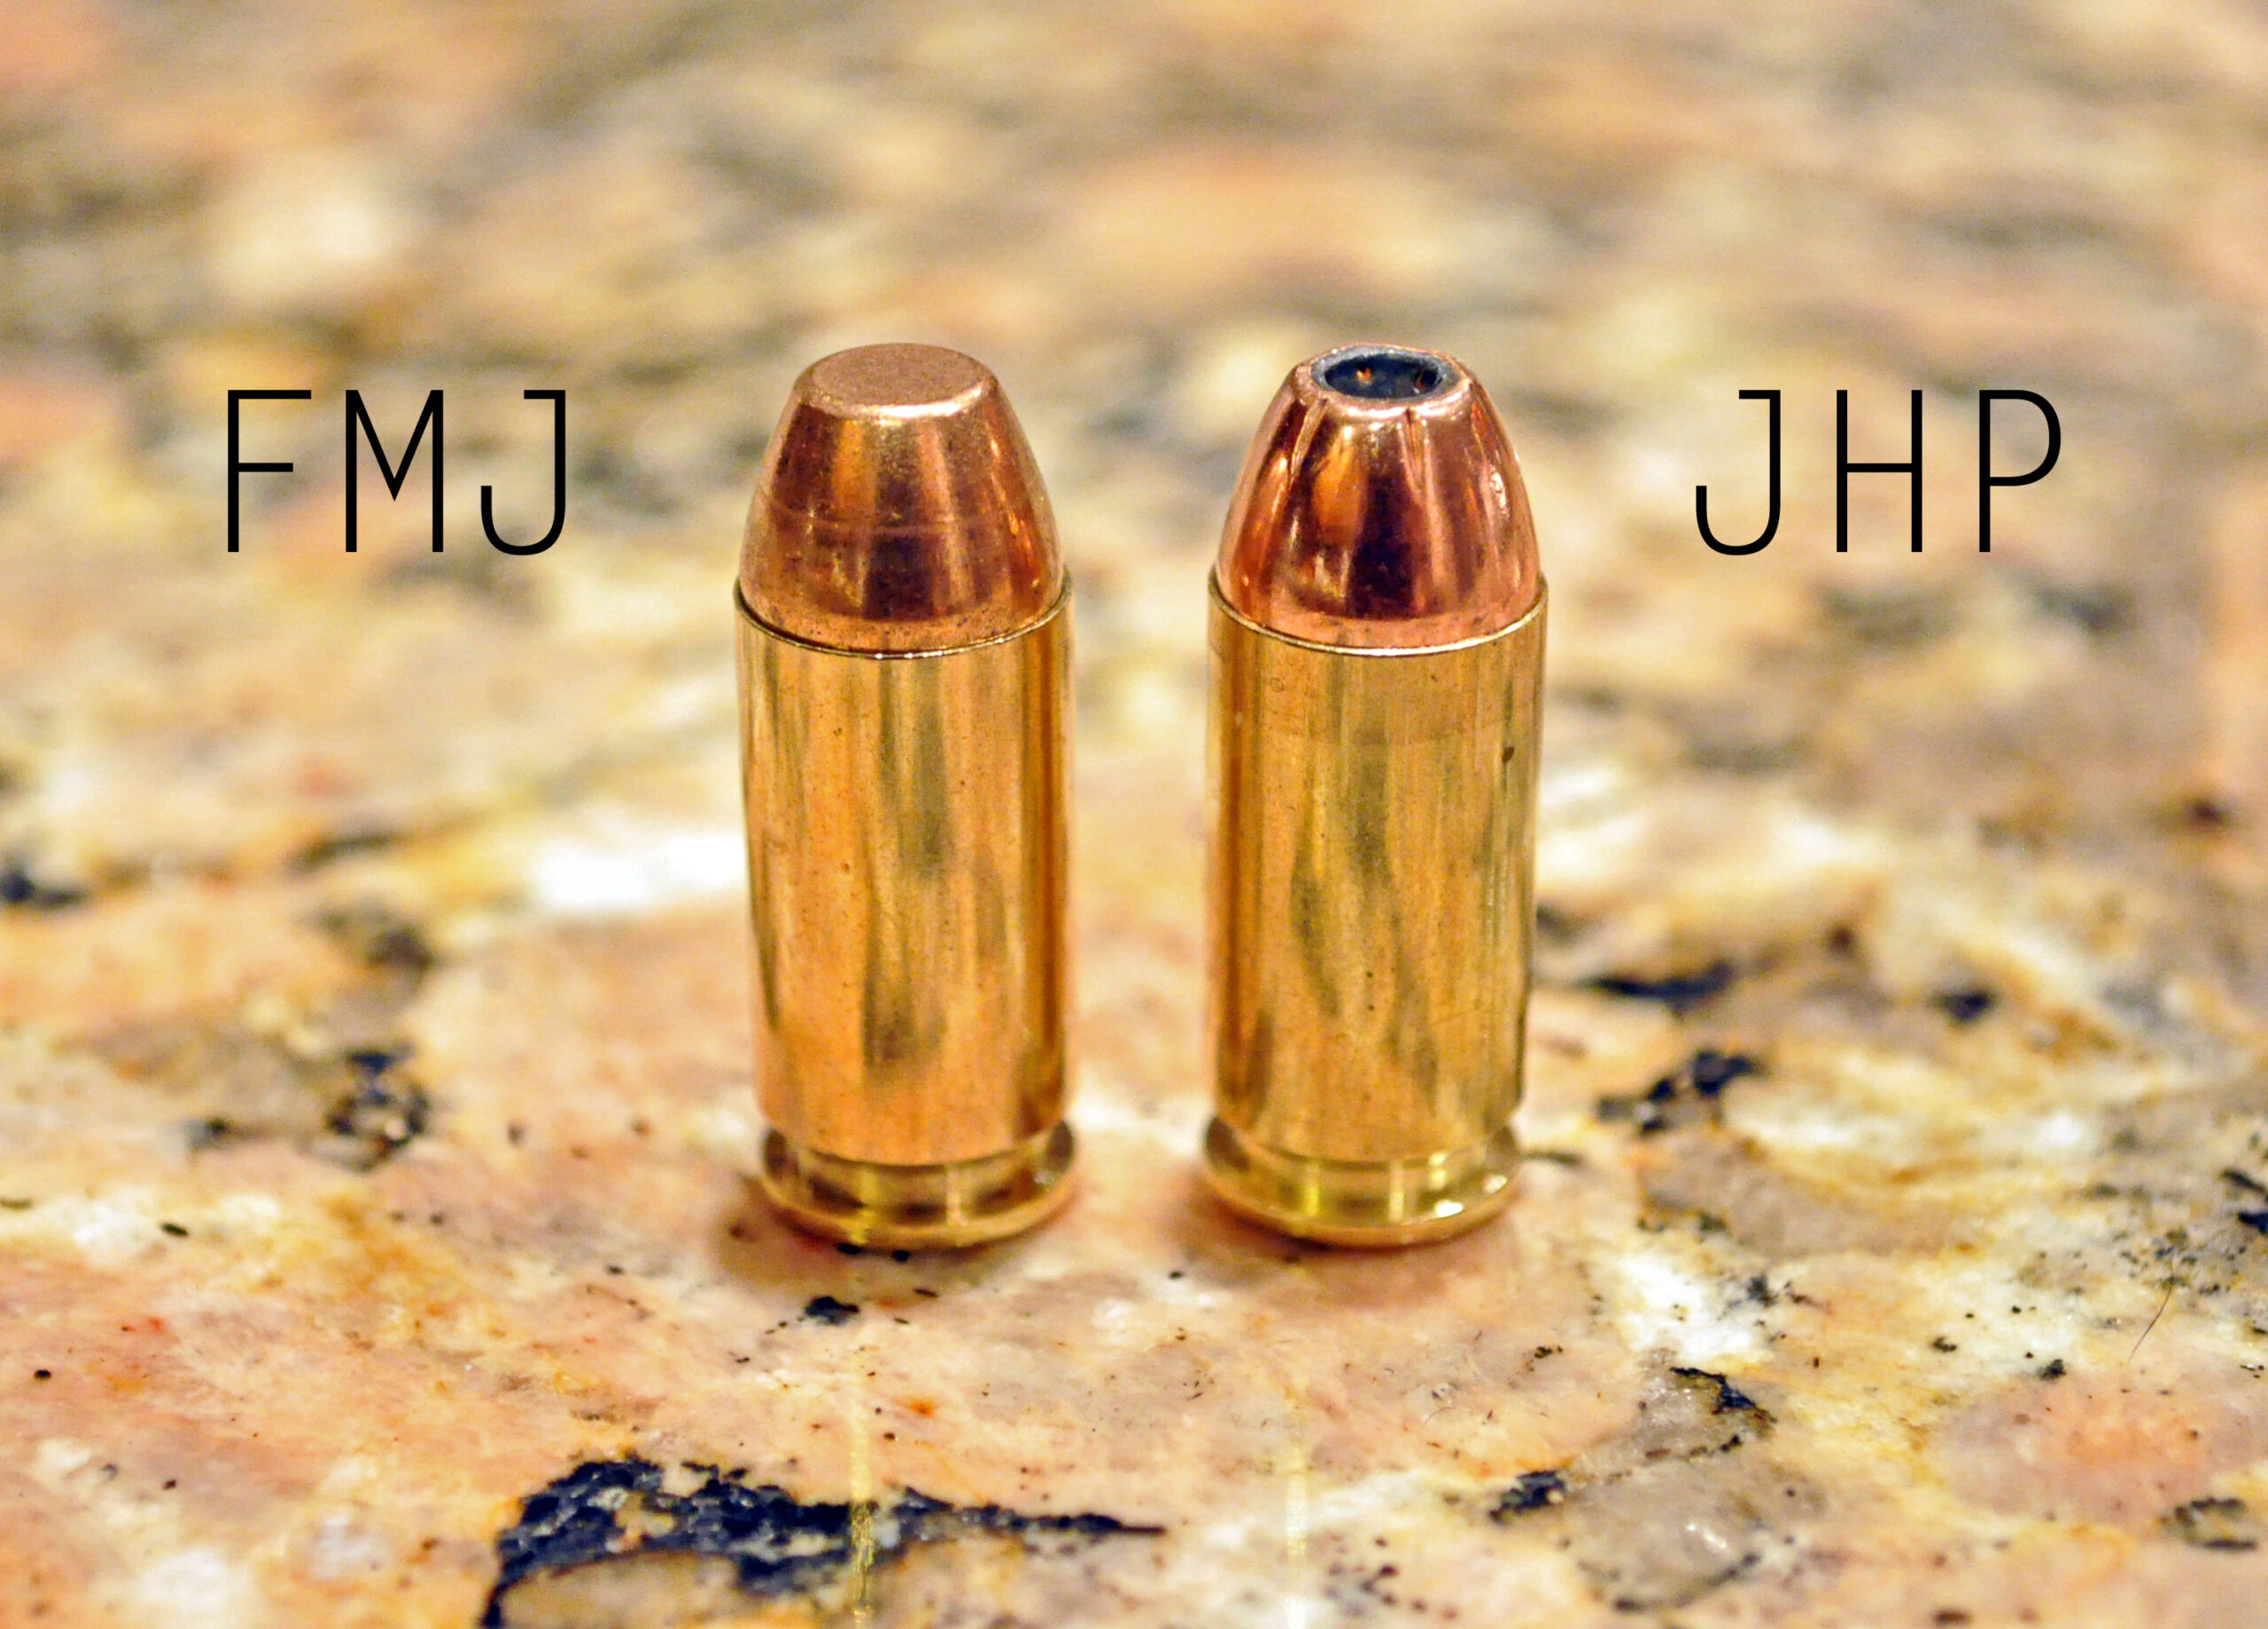 It is extremely important to train with carry ammo. Know the differences between FMJ and JHP, etc.